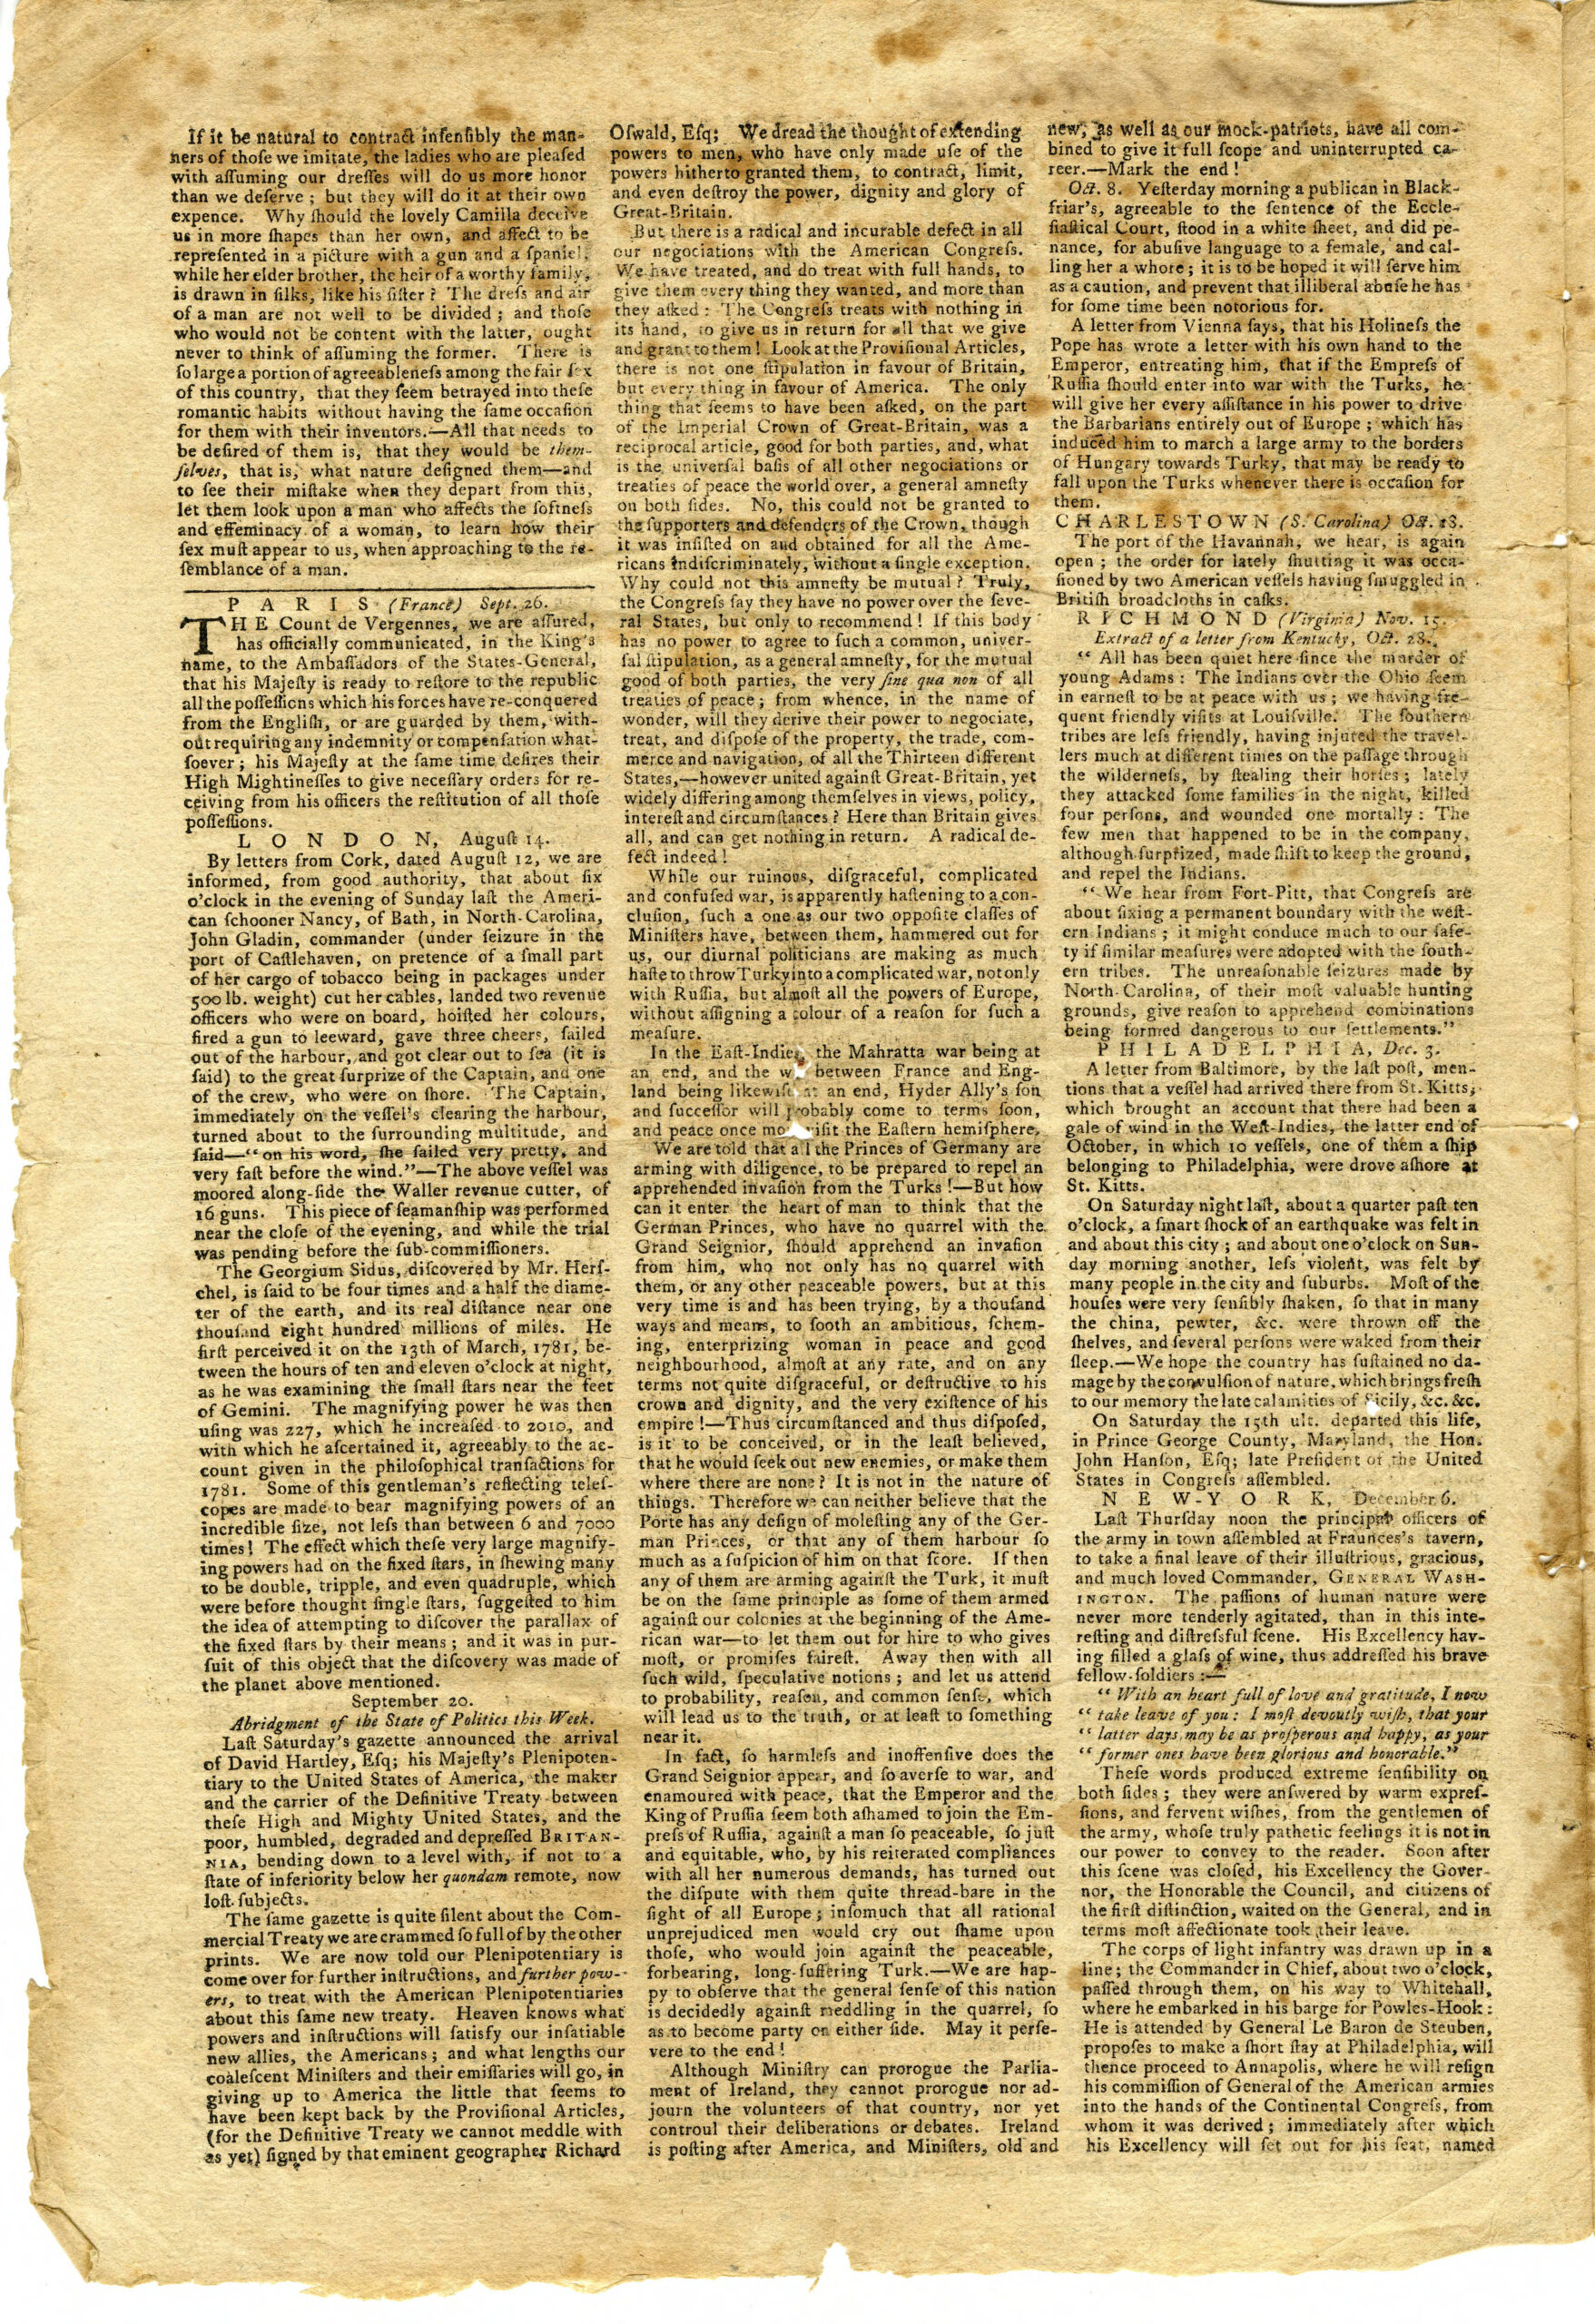 The Providence Gazette and Country Journal Providence: W. Goddard, December 20, 1783